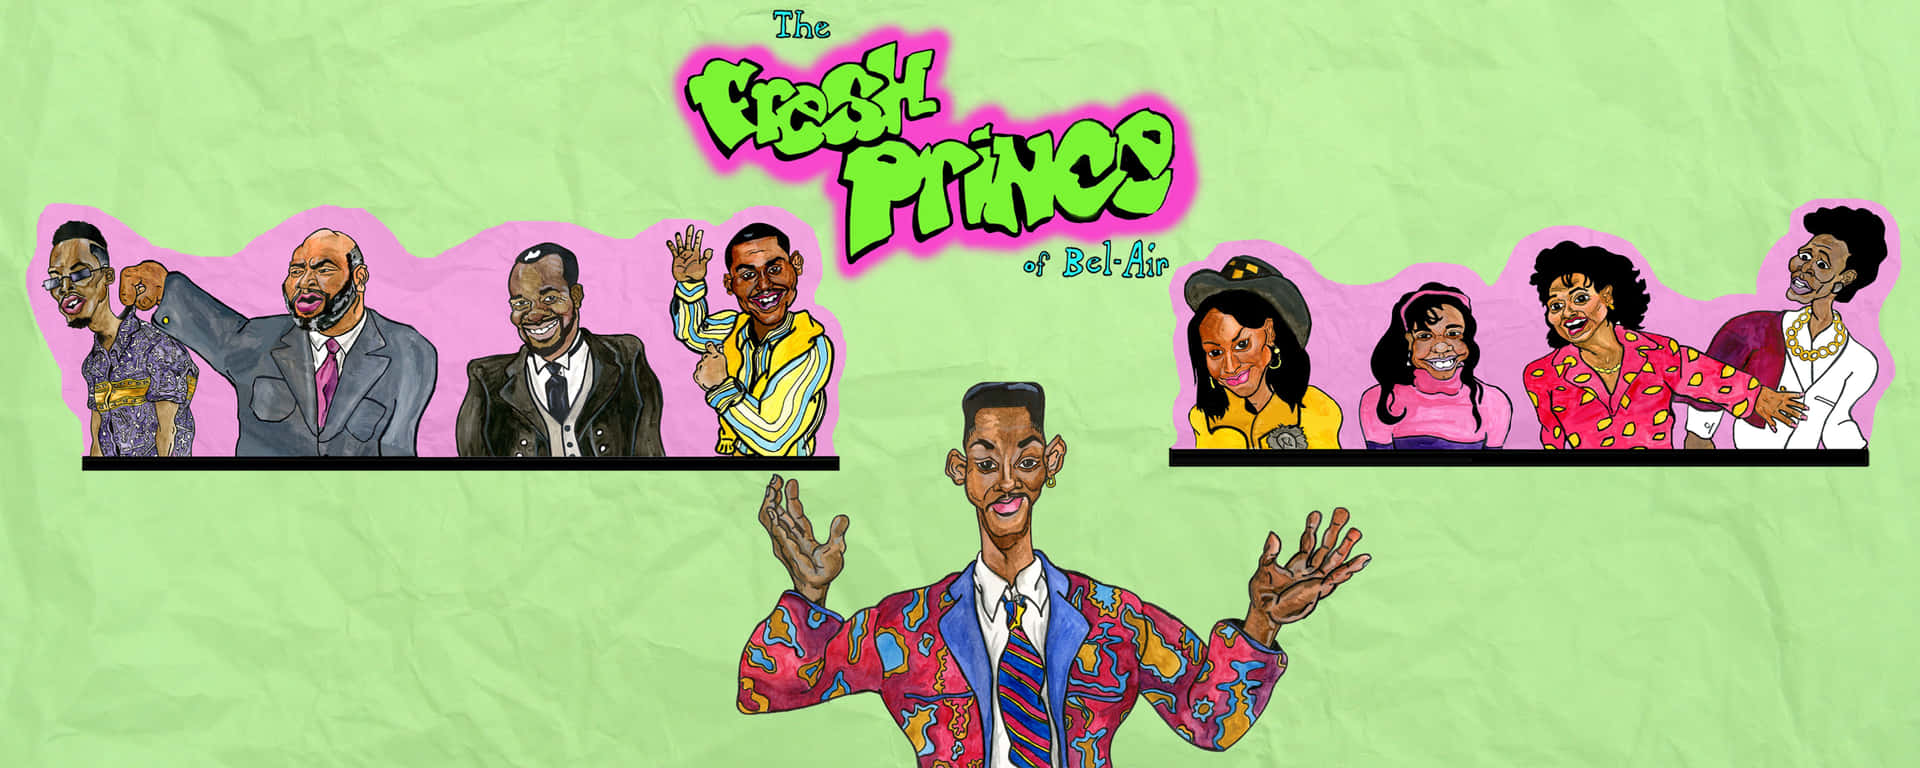 The Fresh Prince throwback 90s vibes